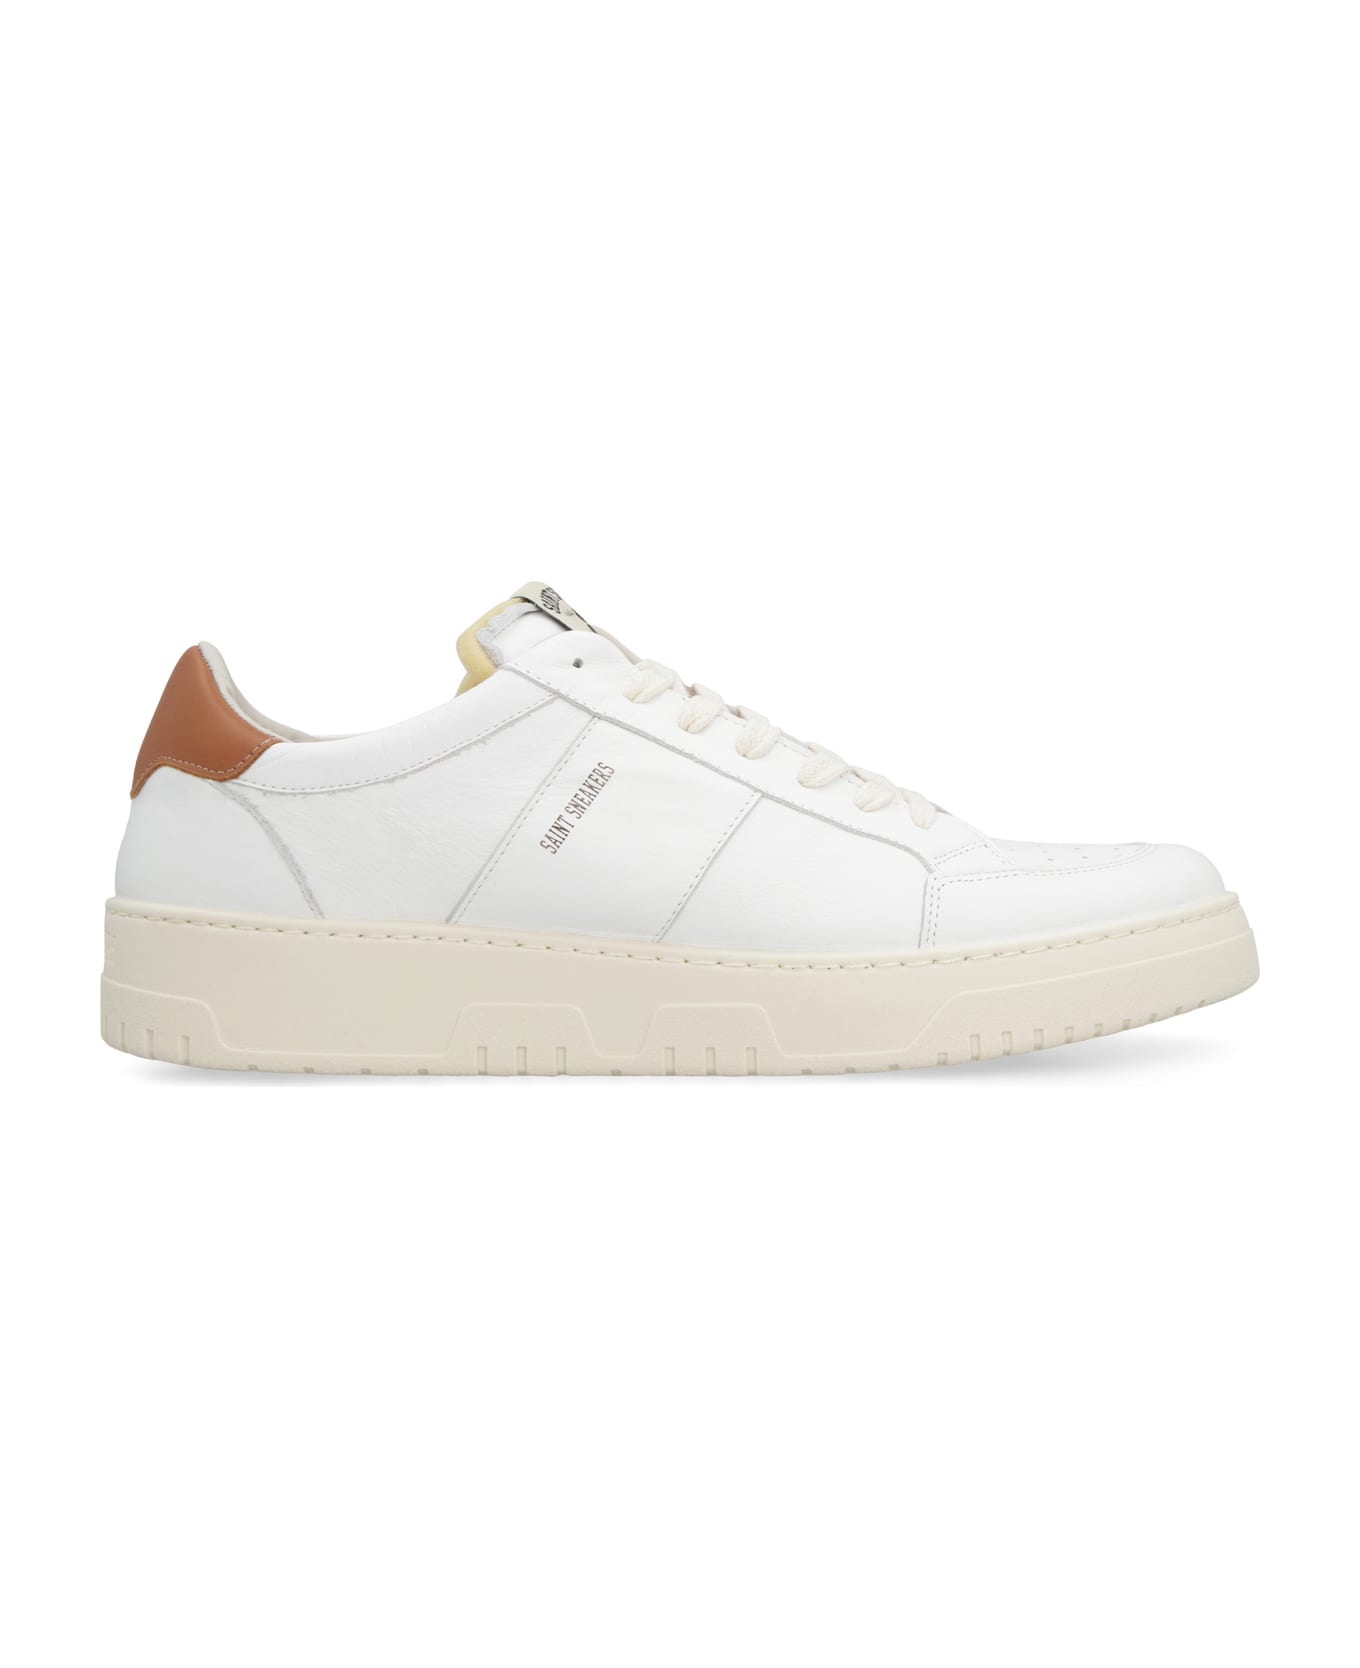 Saint Sneakers Golf Leather Low-top Sneakers - White/brown